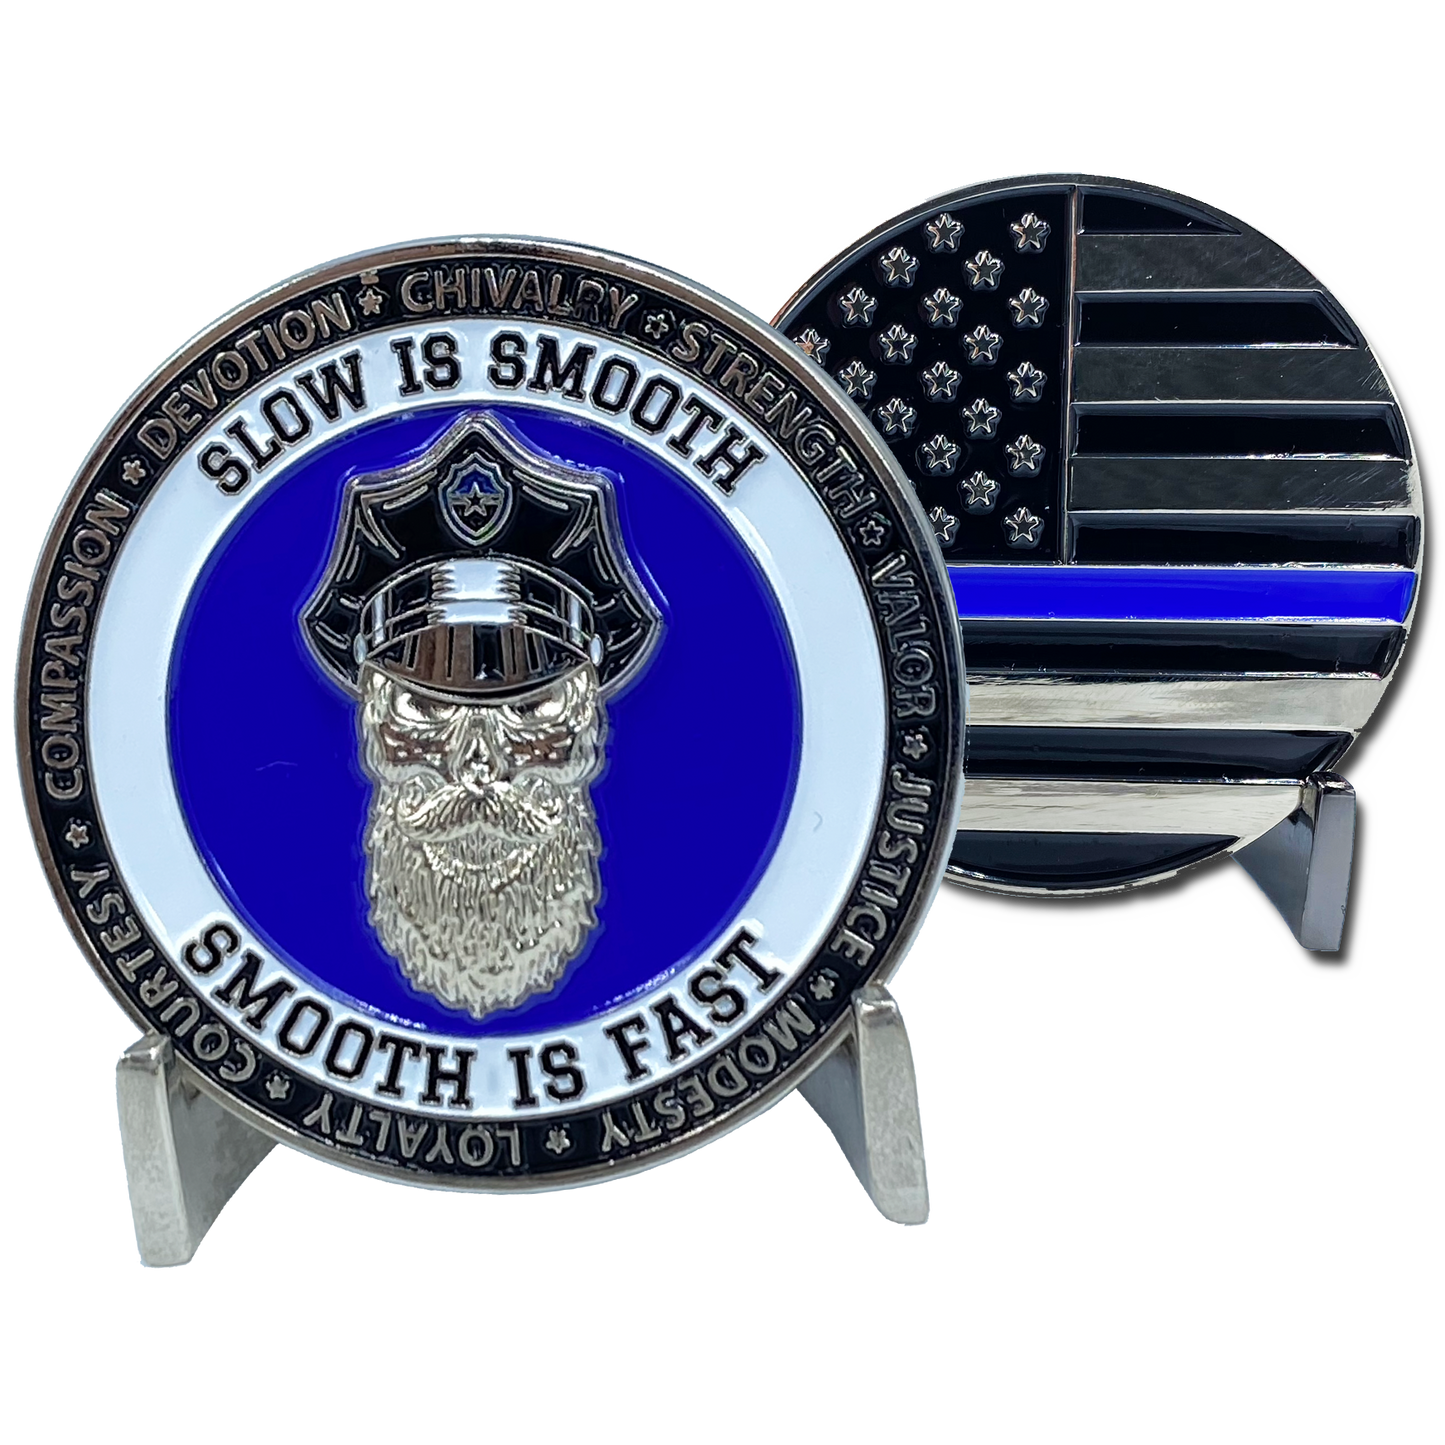 DL10-17 Thin Blue Line Challenge Coin SLOW IS SMOOTH, SMOOTH IS FAST Beard Gang Skull Police FBI LAPD CBP USSS Back the Blue